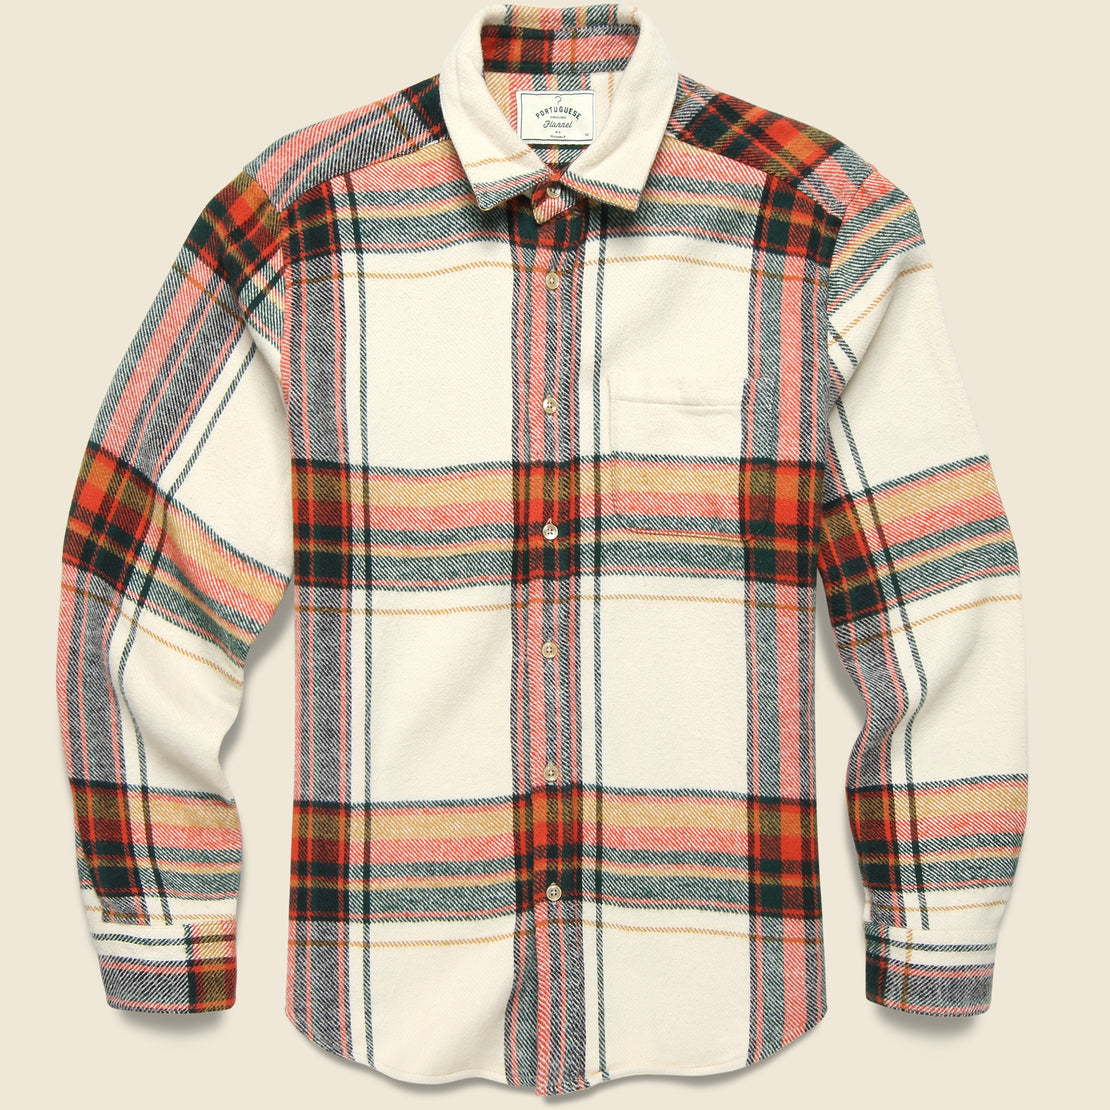 Portuguese Flannel Nords Shirt - White/Red/Green